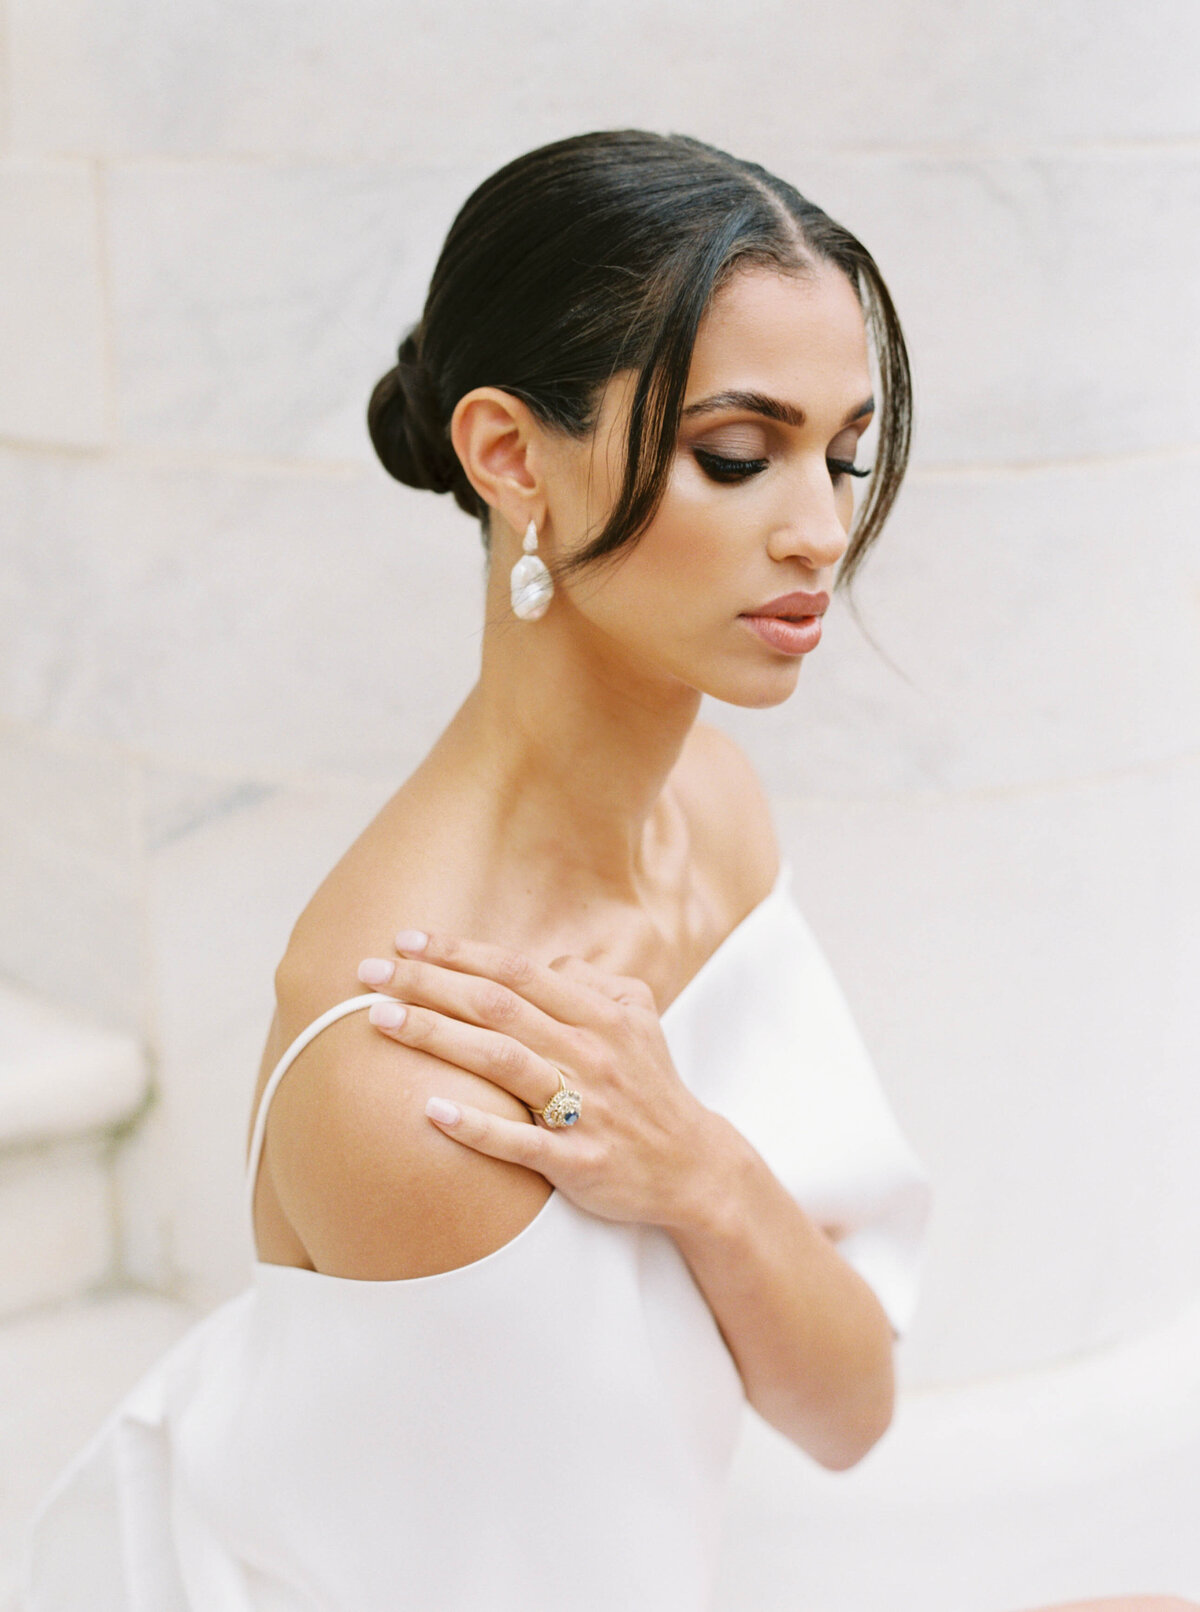 Styled shoot in Mount Vernon Baltimore, Photo and Styling by East Made Co, Hair and makeup by Caitlyn Meyer, Featured in Baltimore Weddings Magazine